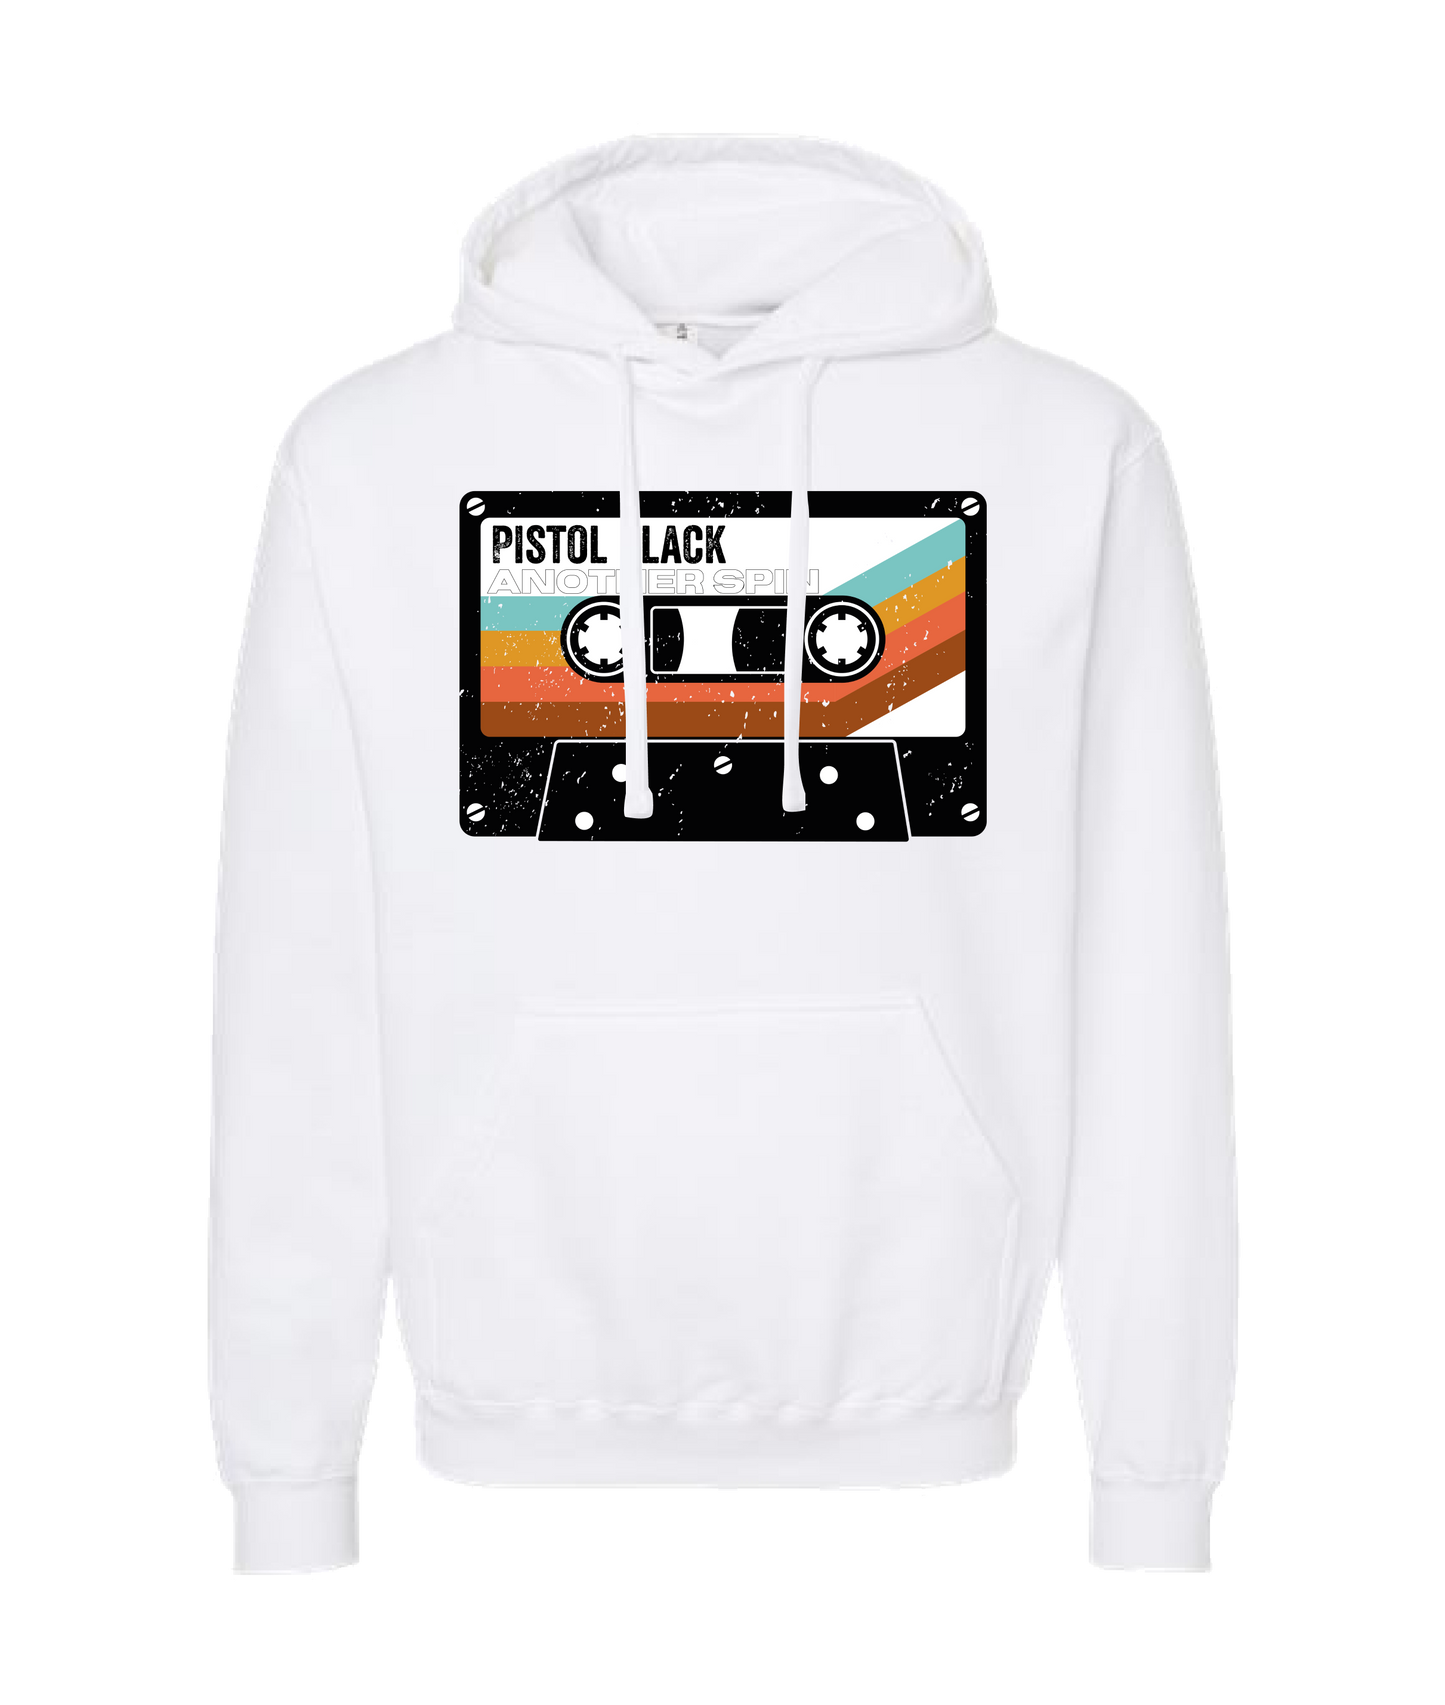 Pistol Black - Another Spin - White Hoodie